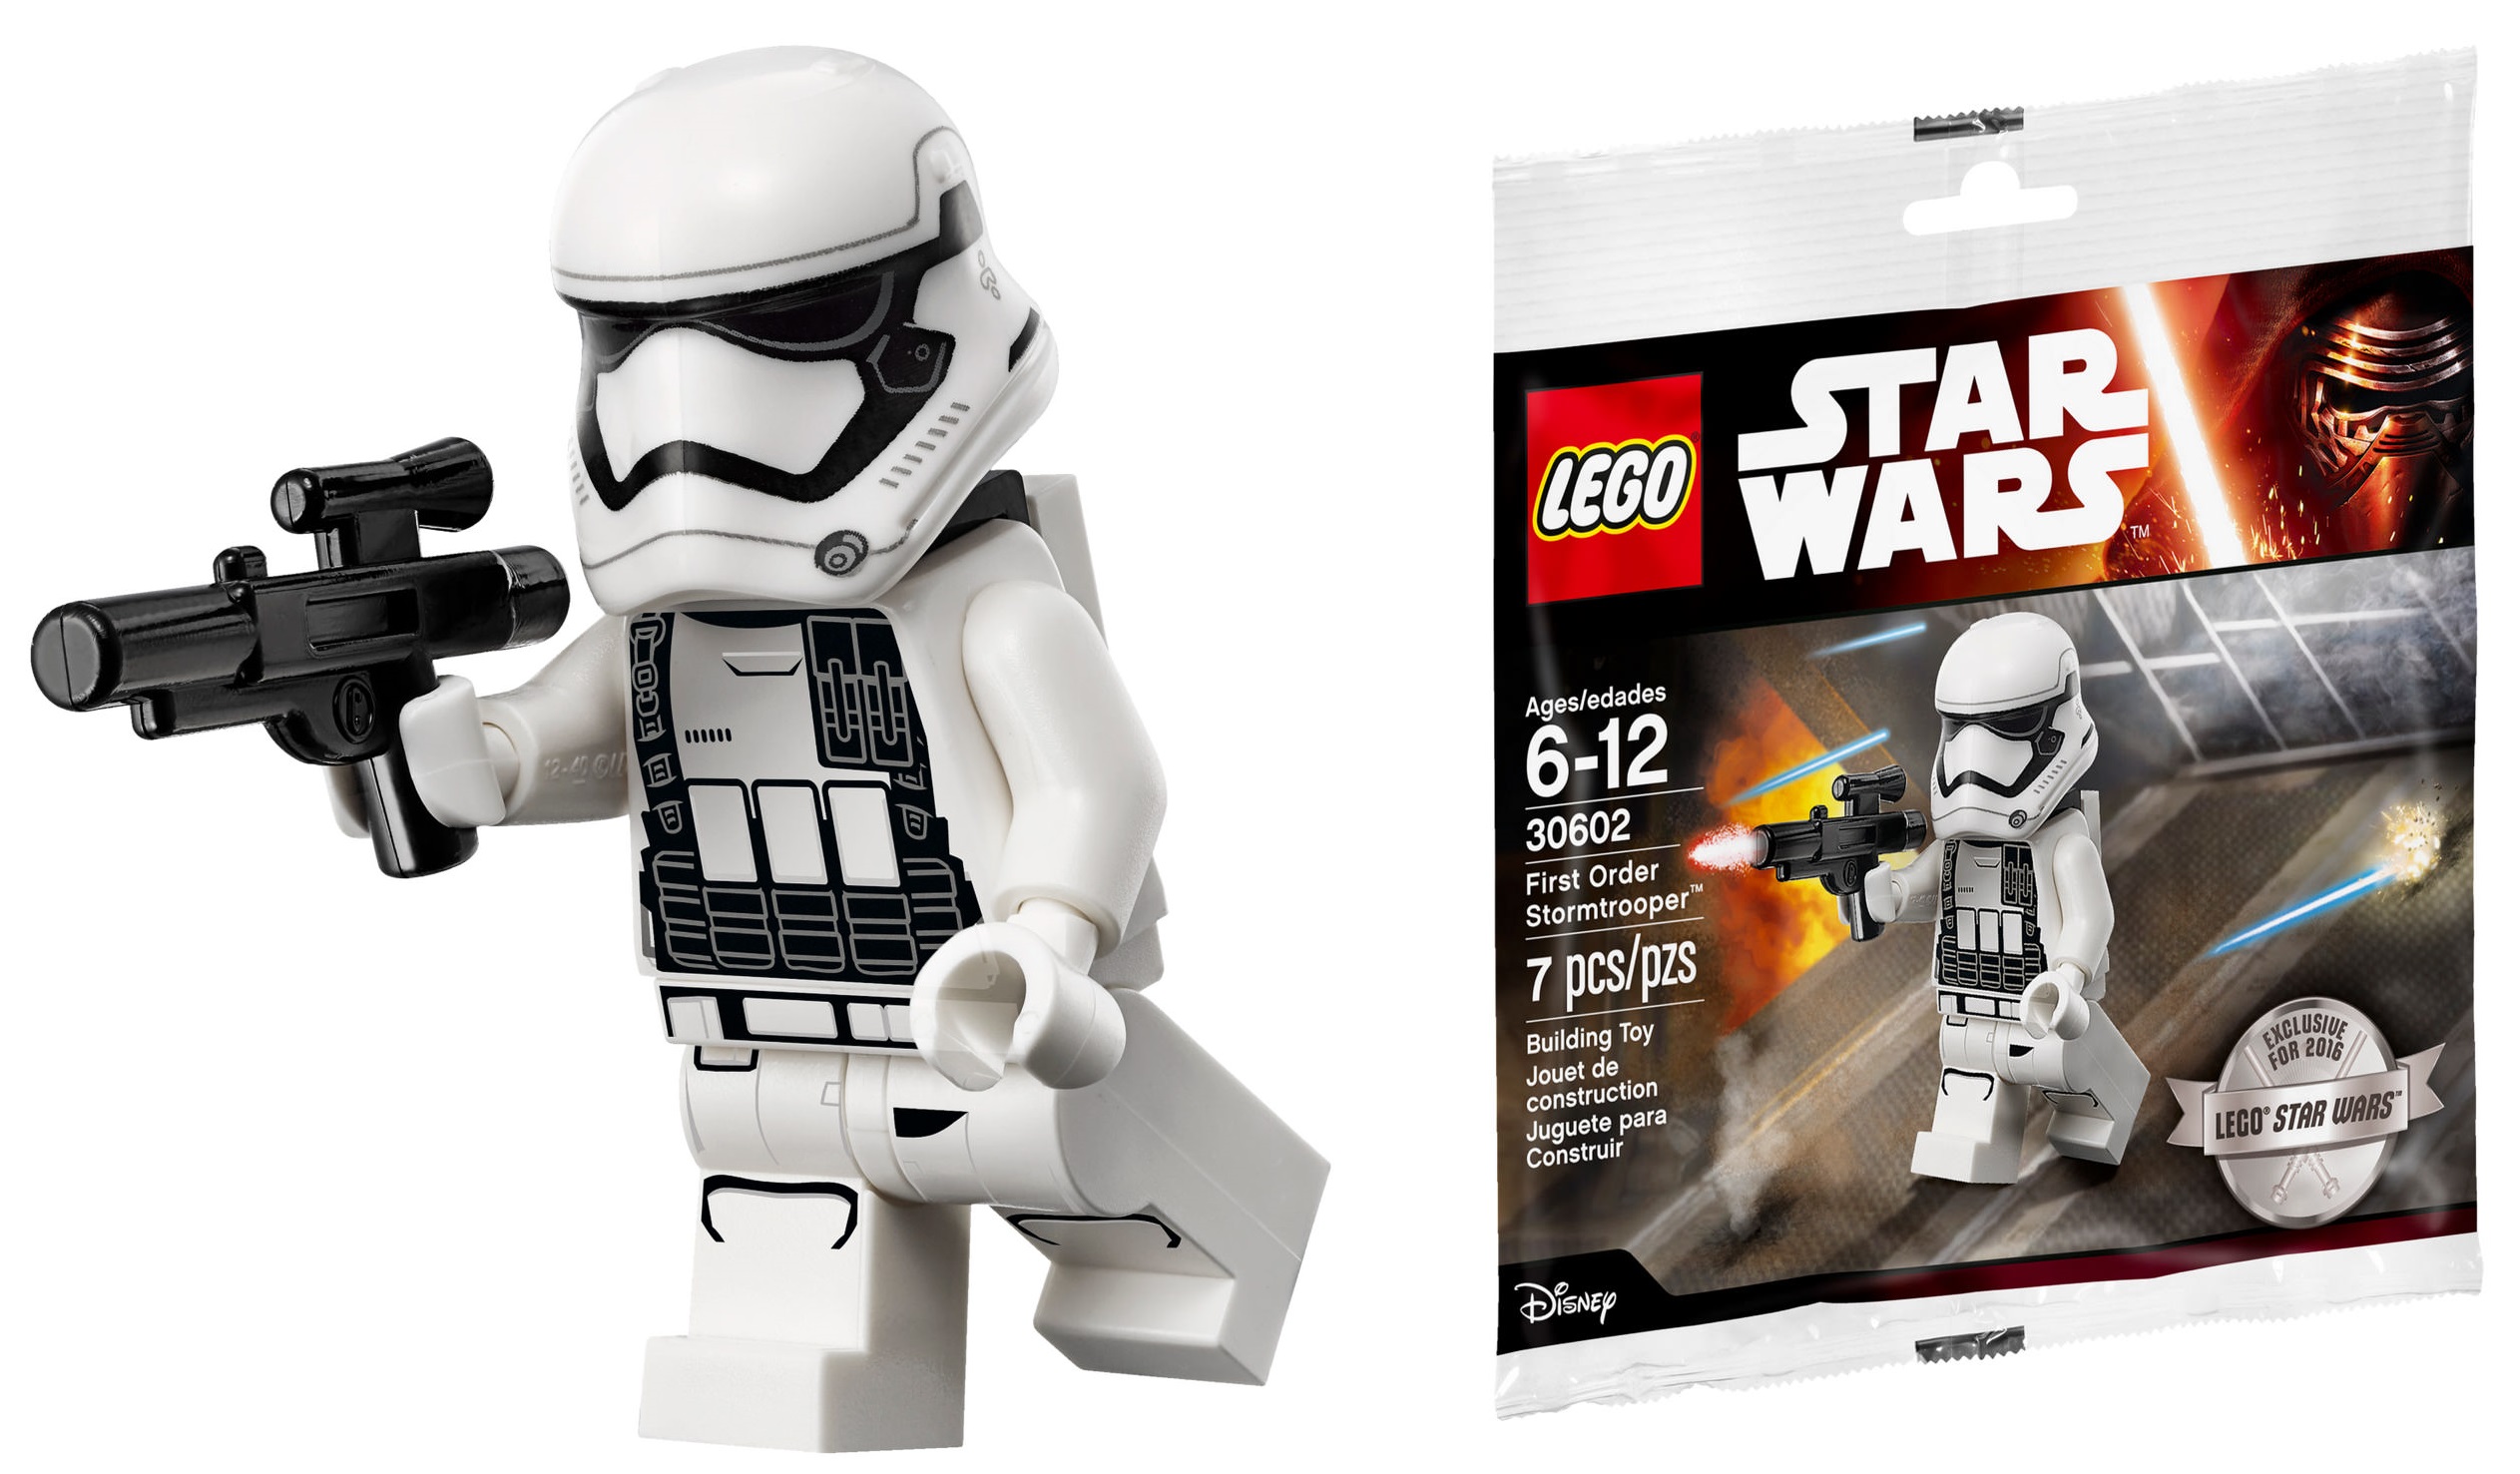 lego first order stormtrooper minifigure